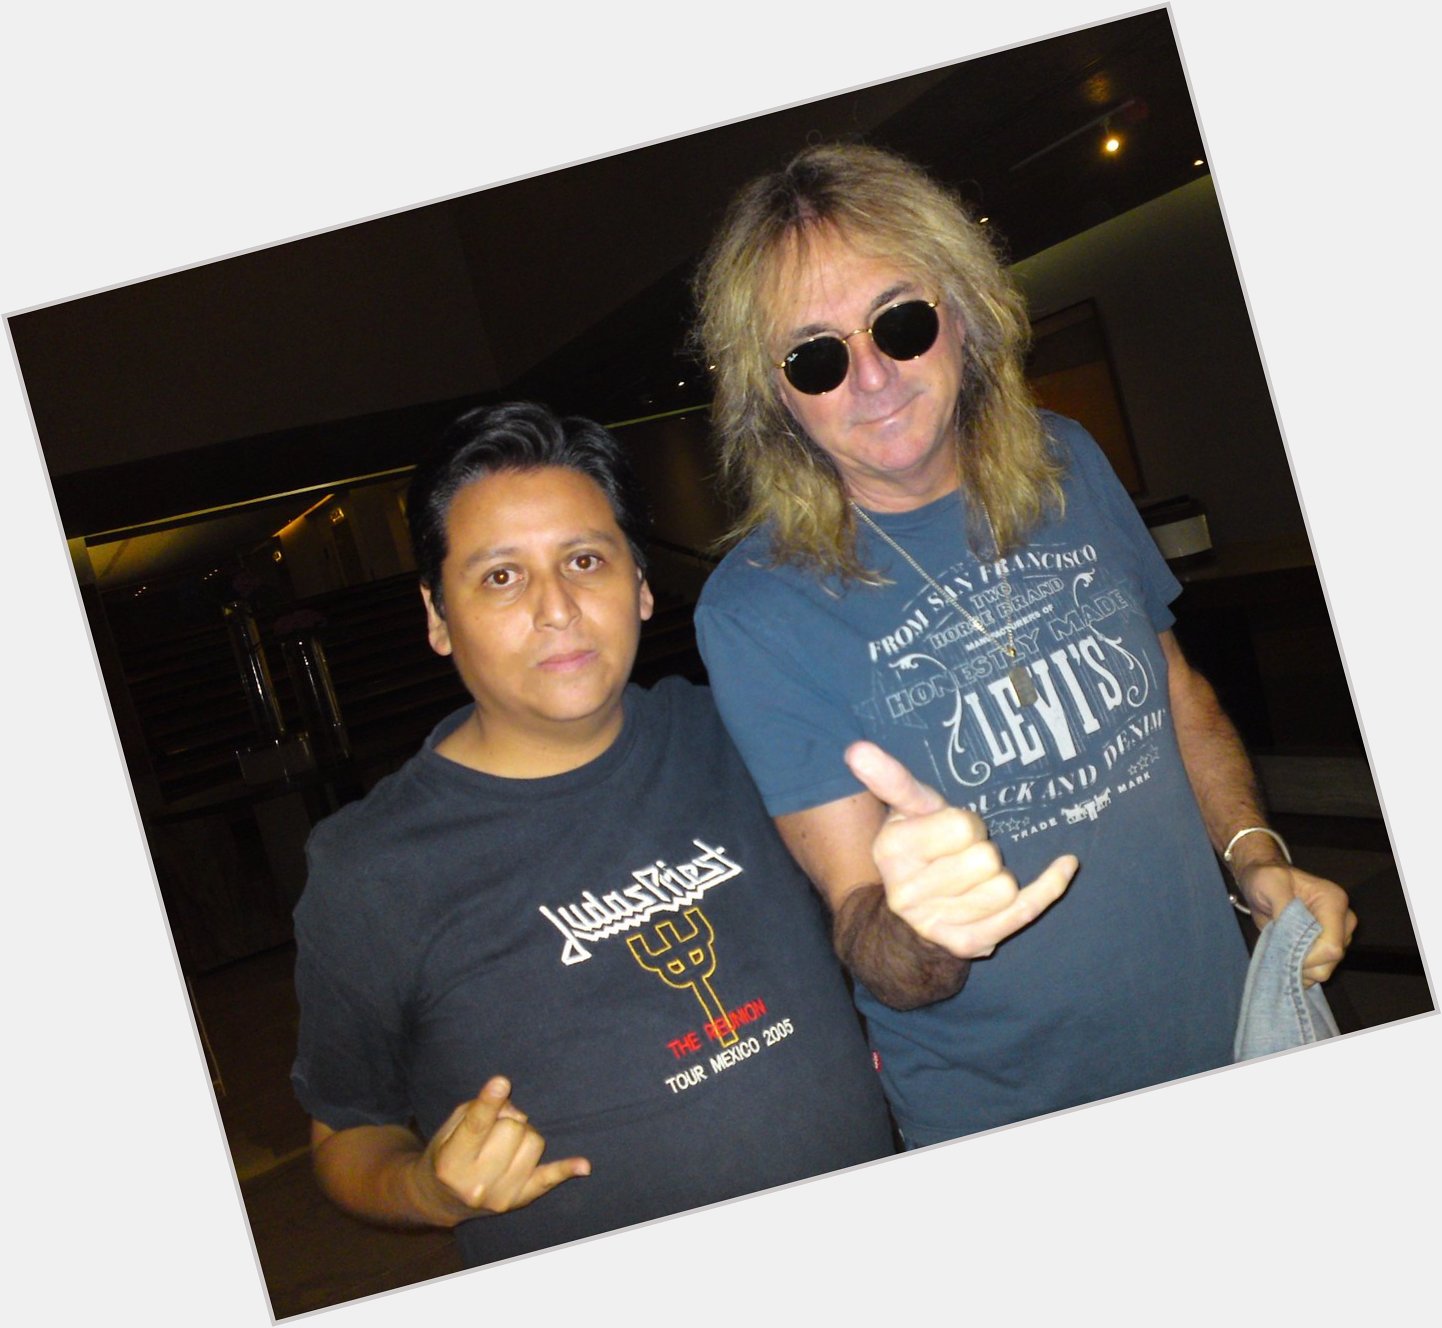  Happy birthday to a real Metal legend!!! Stay Heavy for many years.  Long live Glenn Tipton \\m/ 